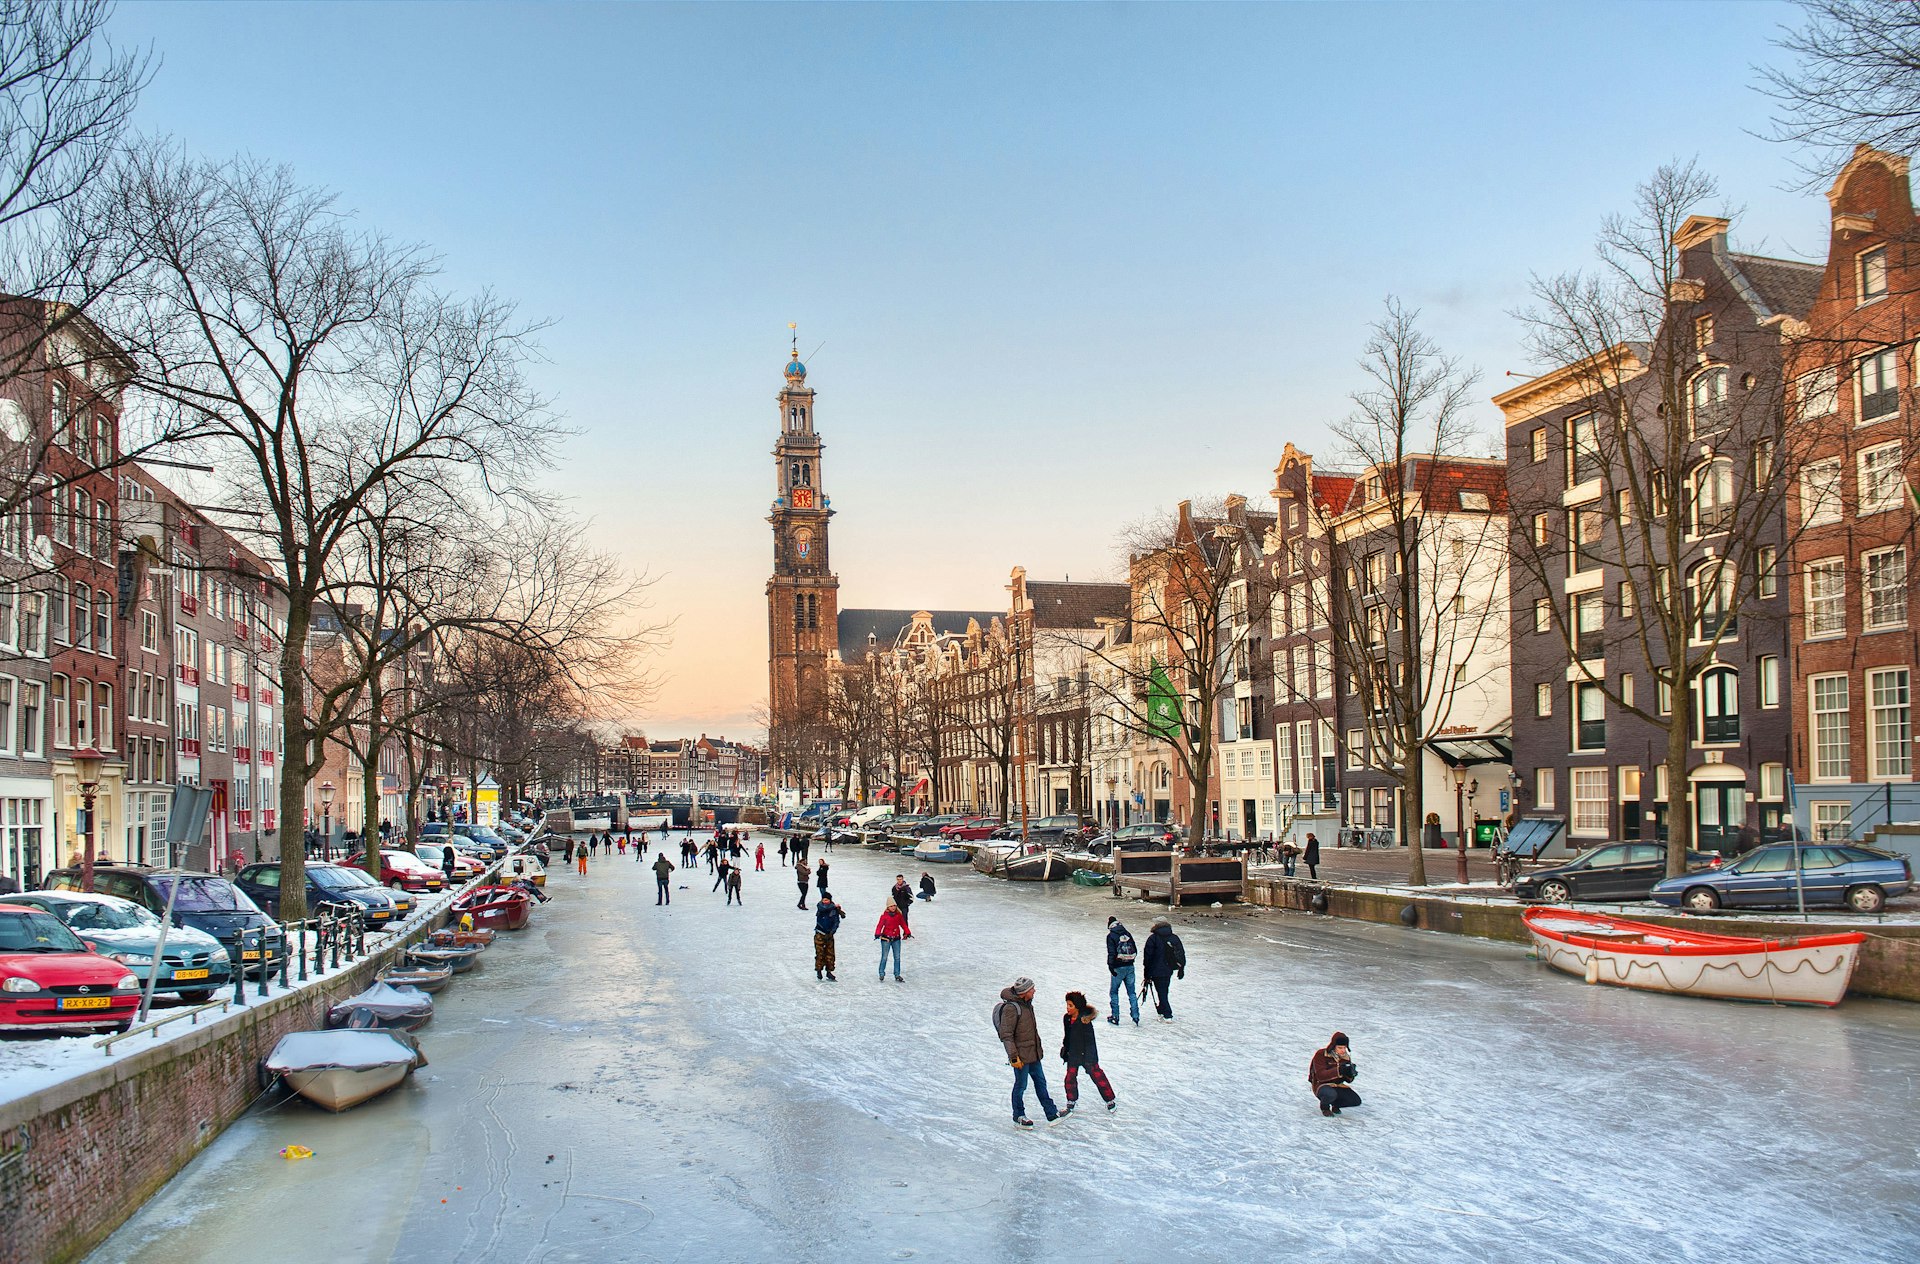 Skaters enjoy the ice on a winter evening on the Prinsengracht in Amsterdam, the Netherlands.